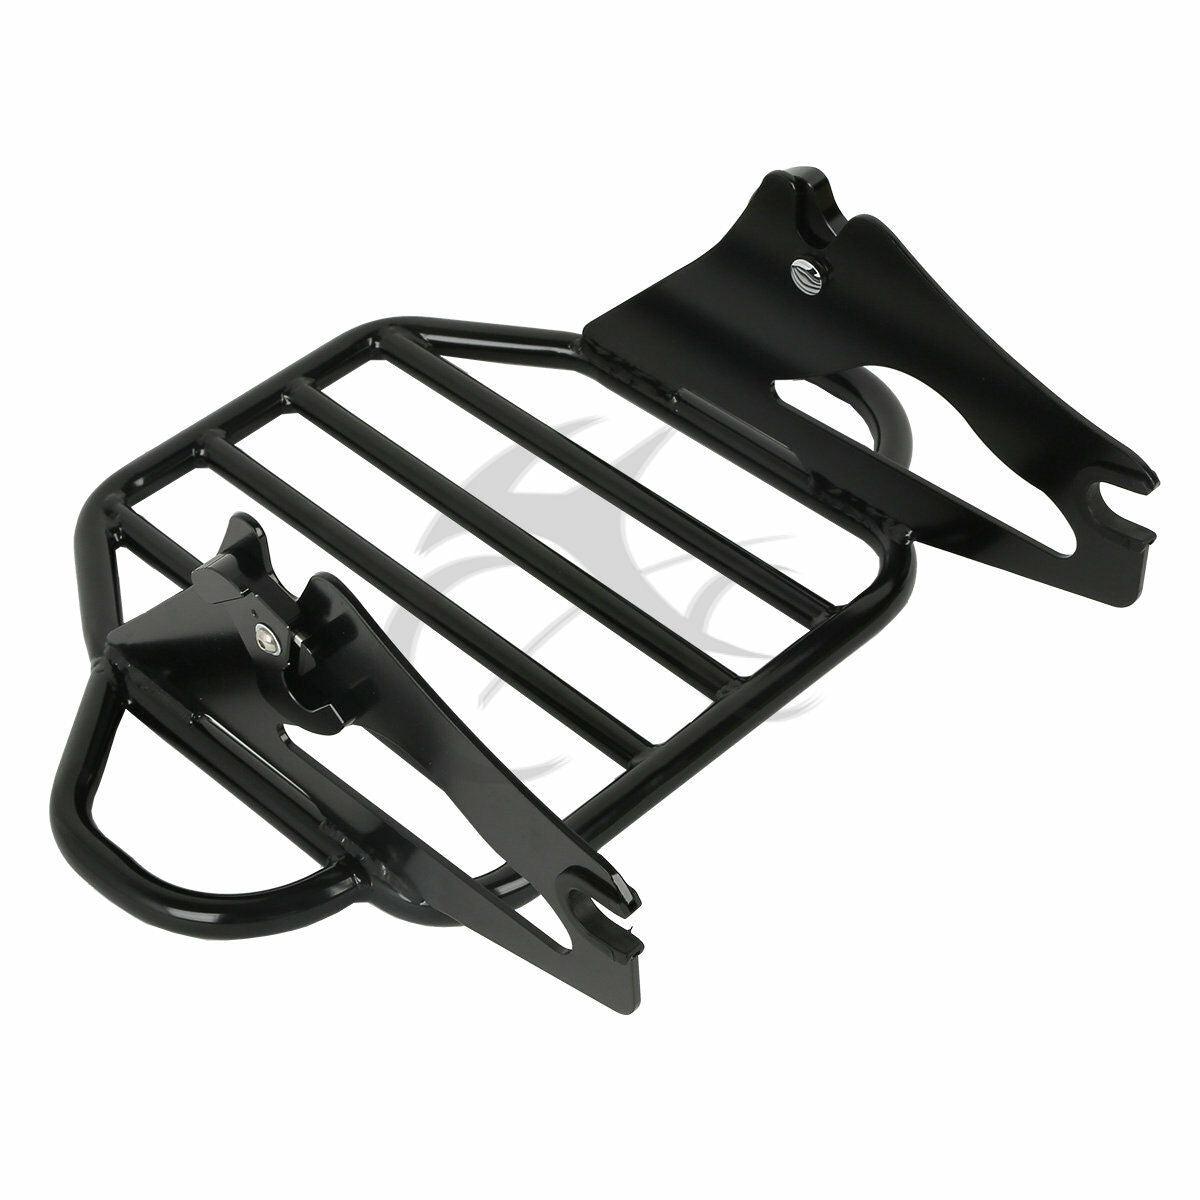 Backrest Sissy Bar Luggage Rack 4 Point Docking Fit For Harley Road Glide 09-13 - Moto Life Products